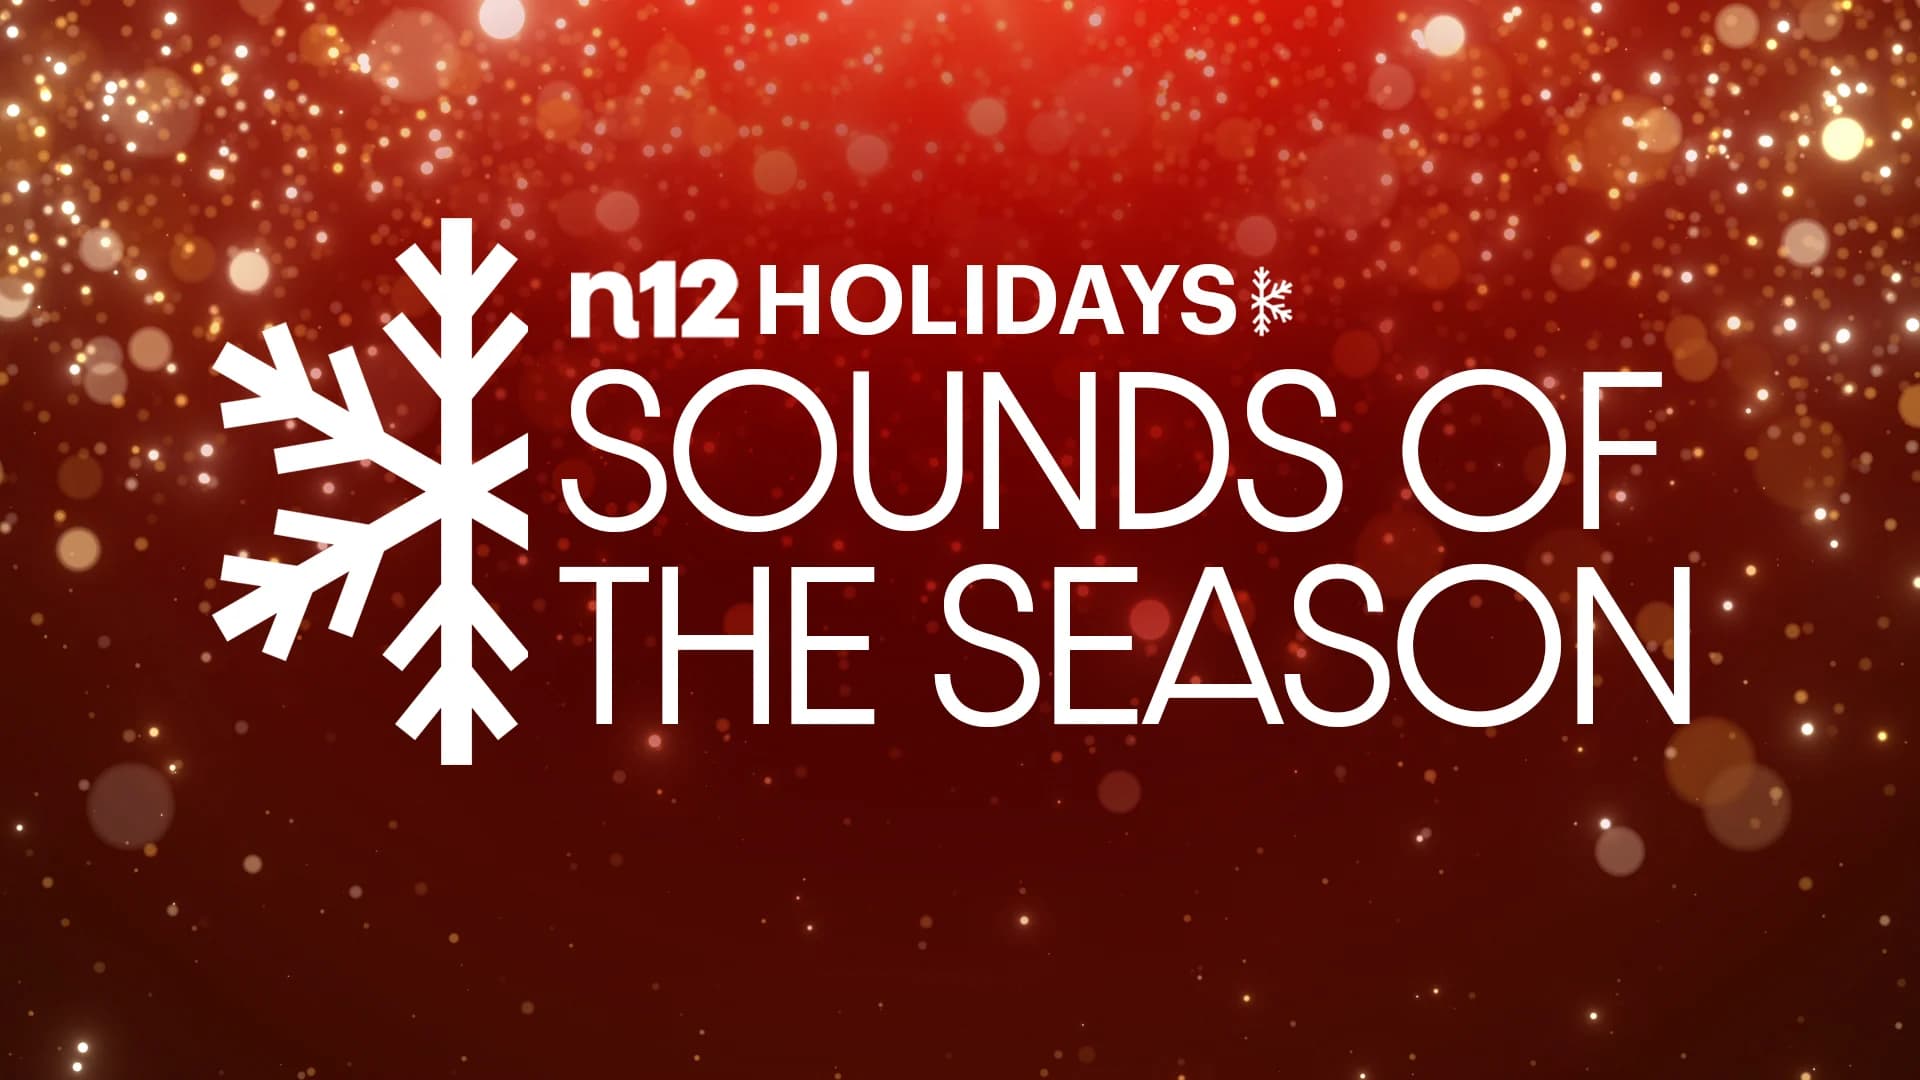 NEWS 12 “SOUNDS OF THE SEASON” CONTEST OFFICIAL RULES